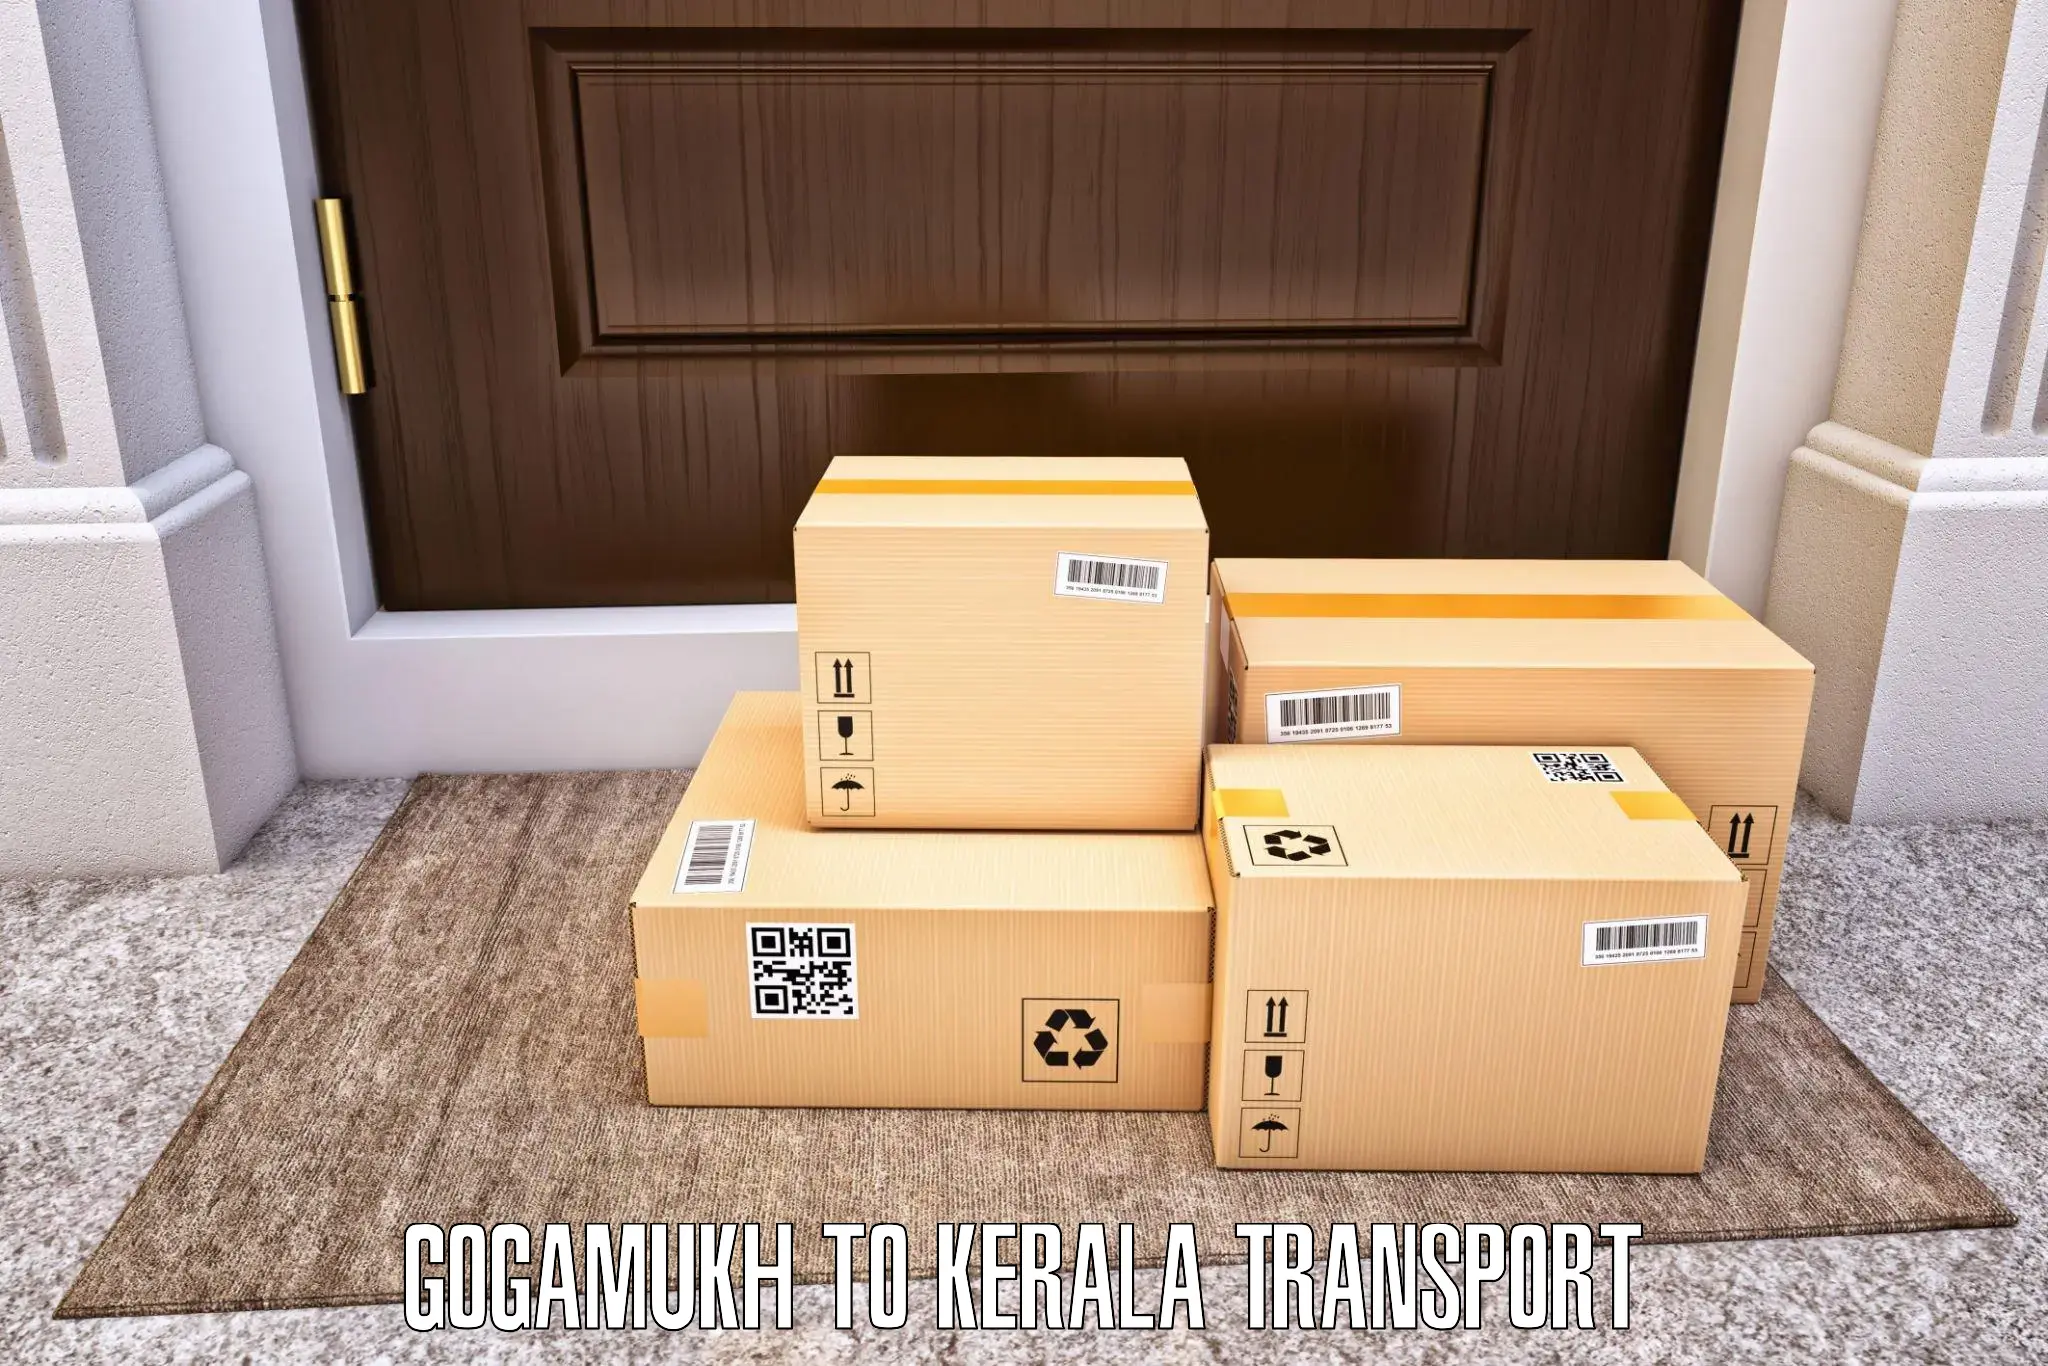 Two wheeler transport services Gogamukh to Perumbavoor